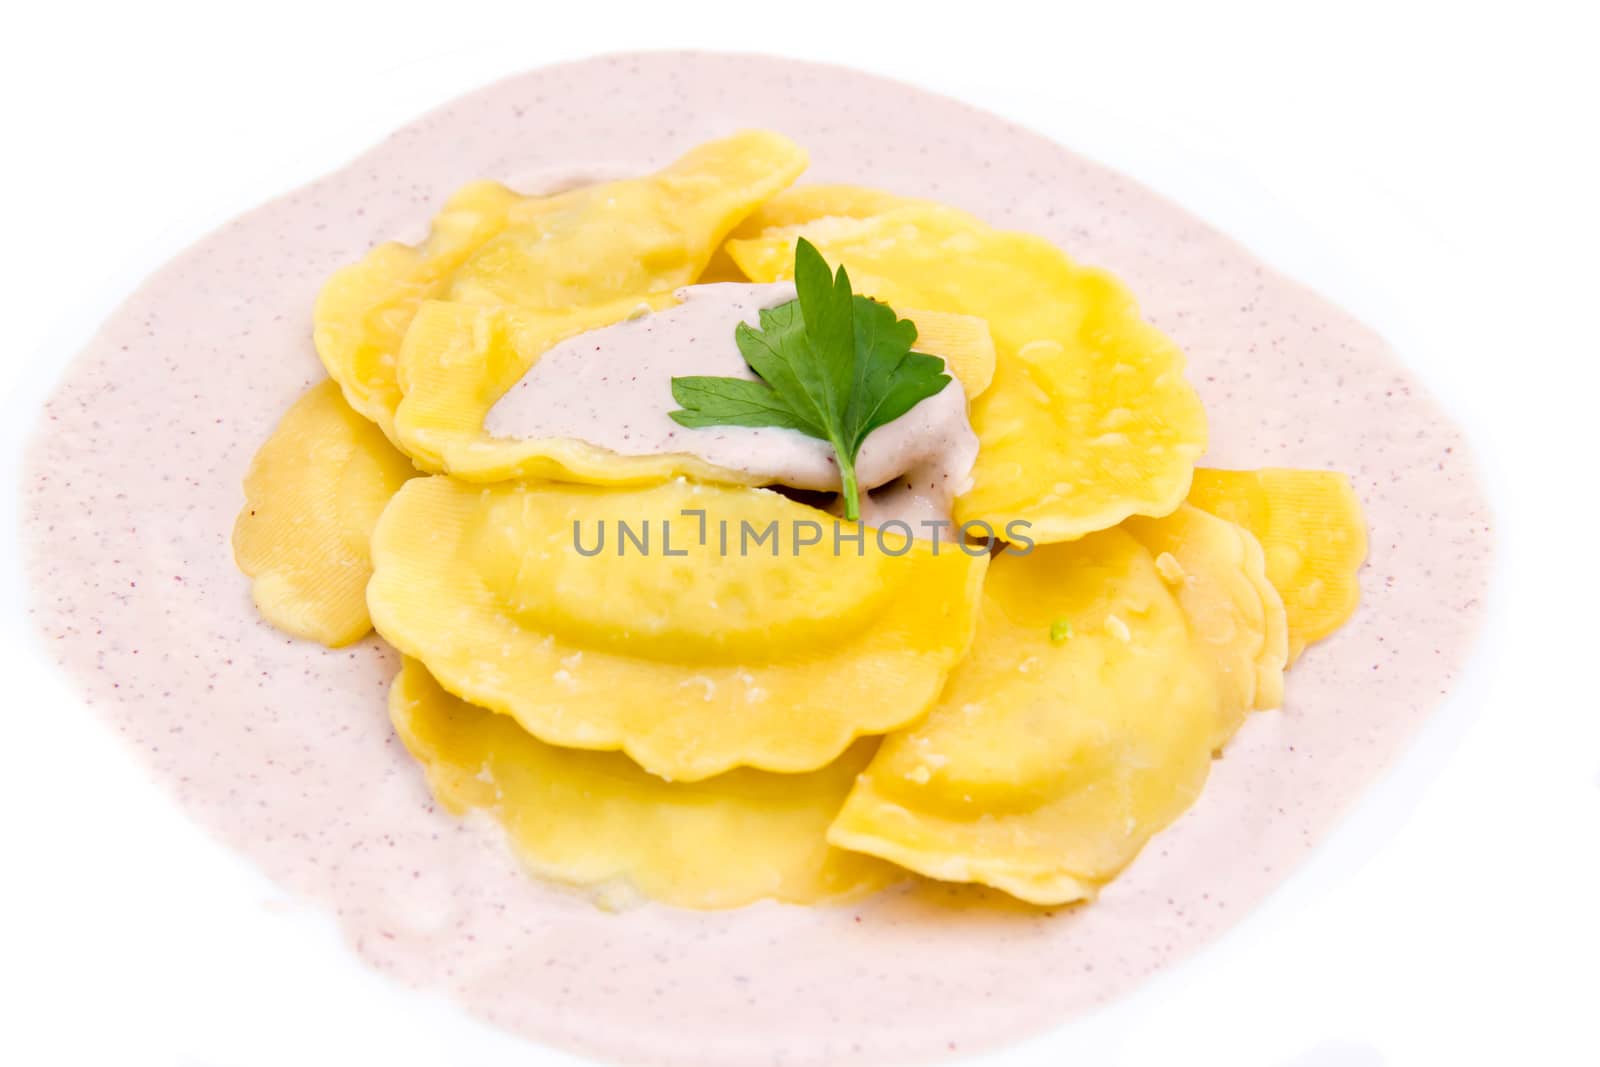 Ravioli with sauce radicchio closely by spafra